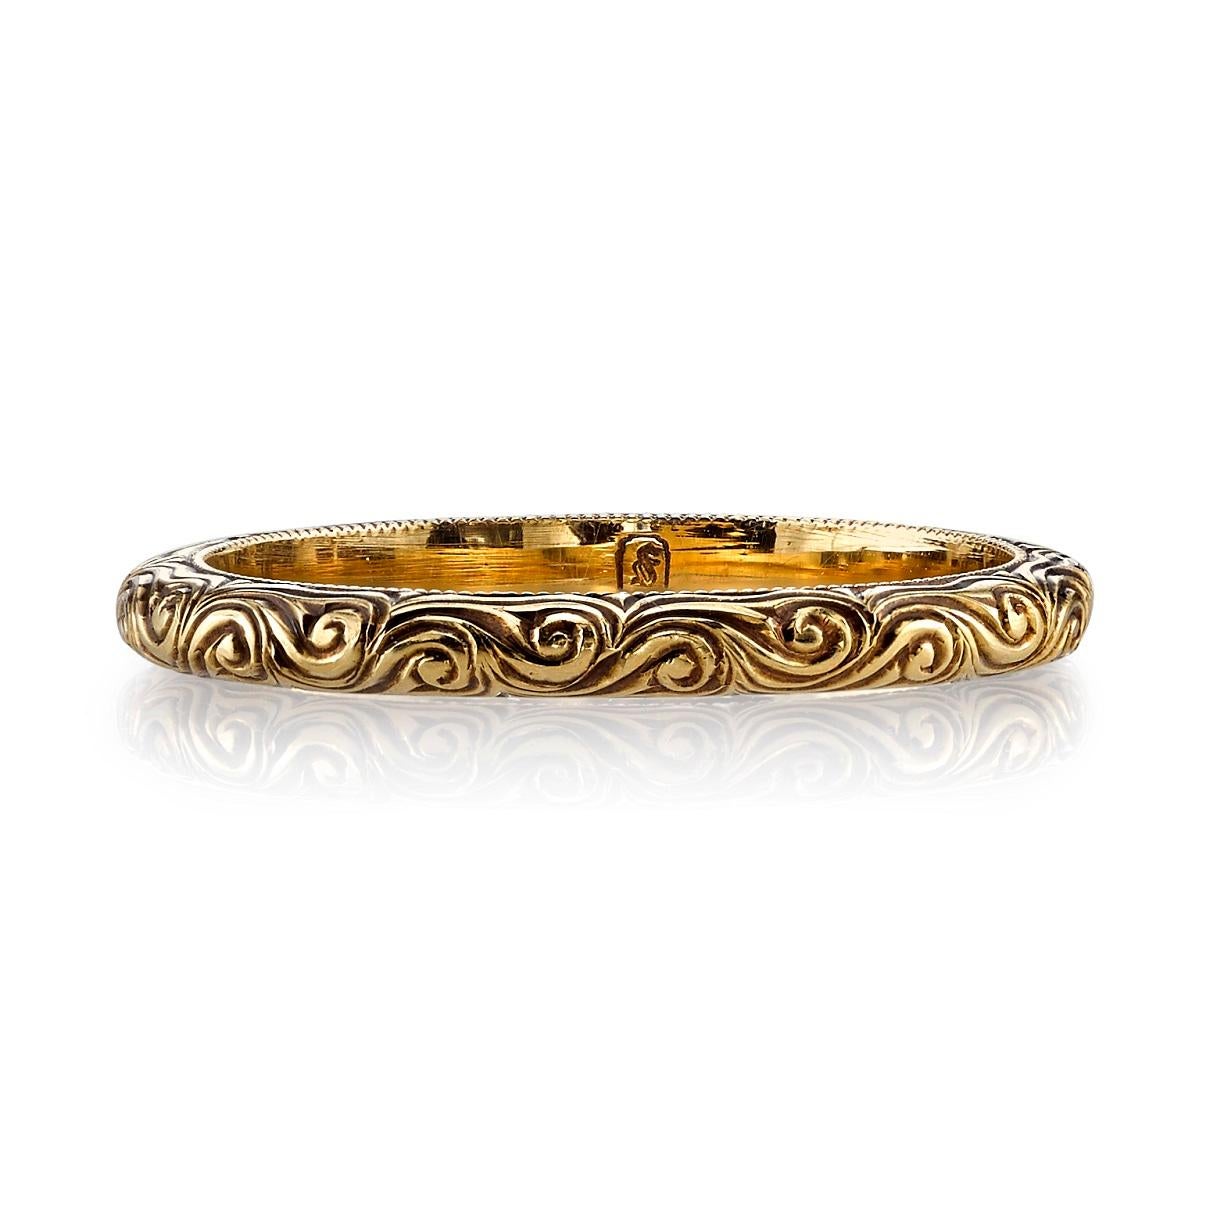 2mm half rounded hand engraved 18K gold band. Available in an oxidized or polished finish.

Our jewelry is made locally in Los Angeles and most pieces are made to order. For these made-to-order items, please allow 8-10 weeks for delivery. In-stock